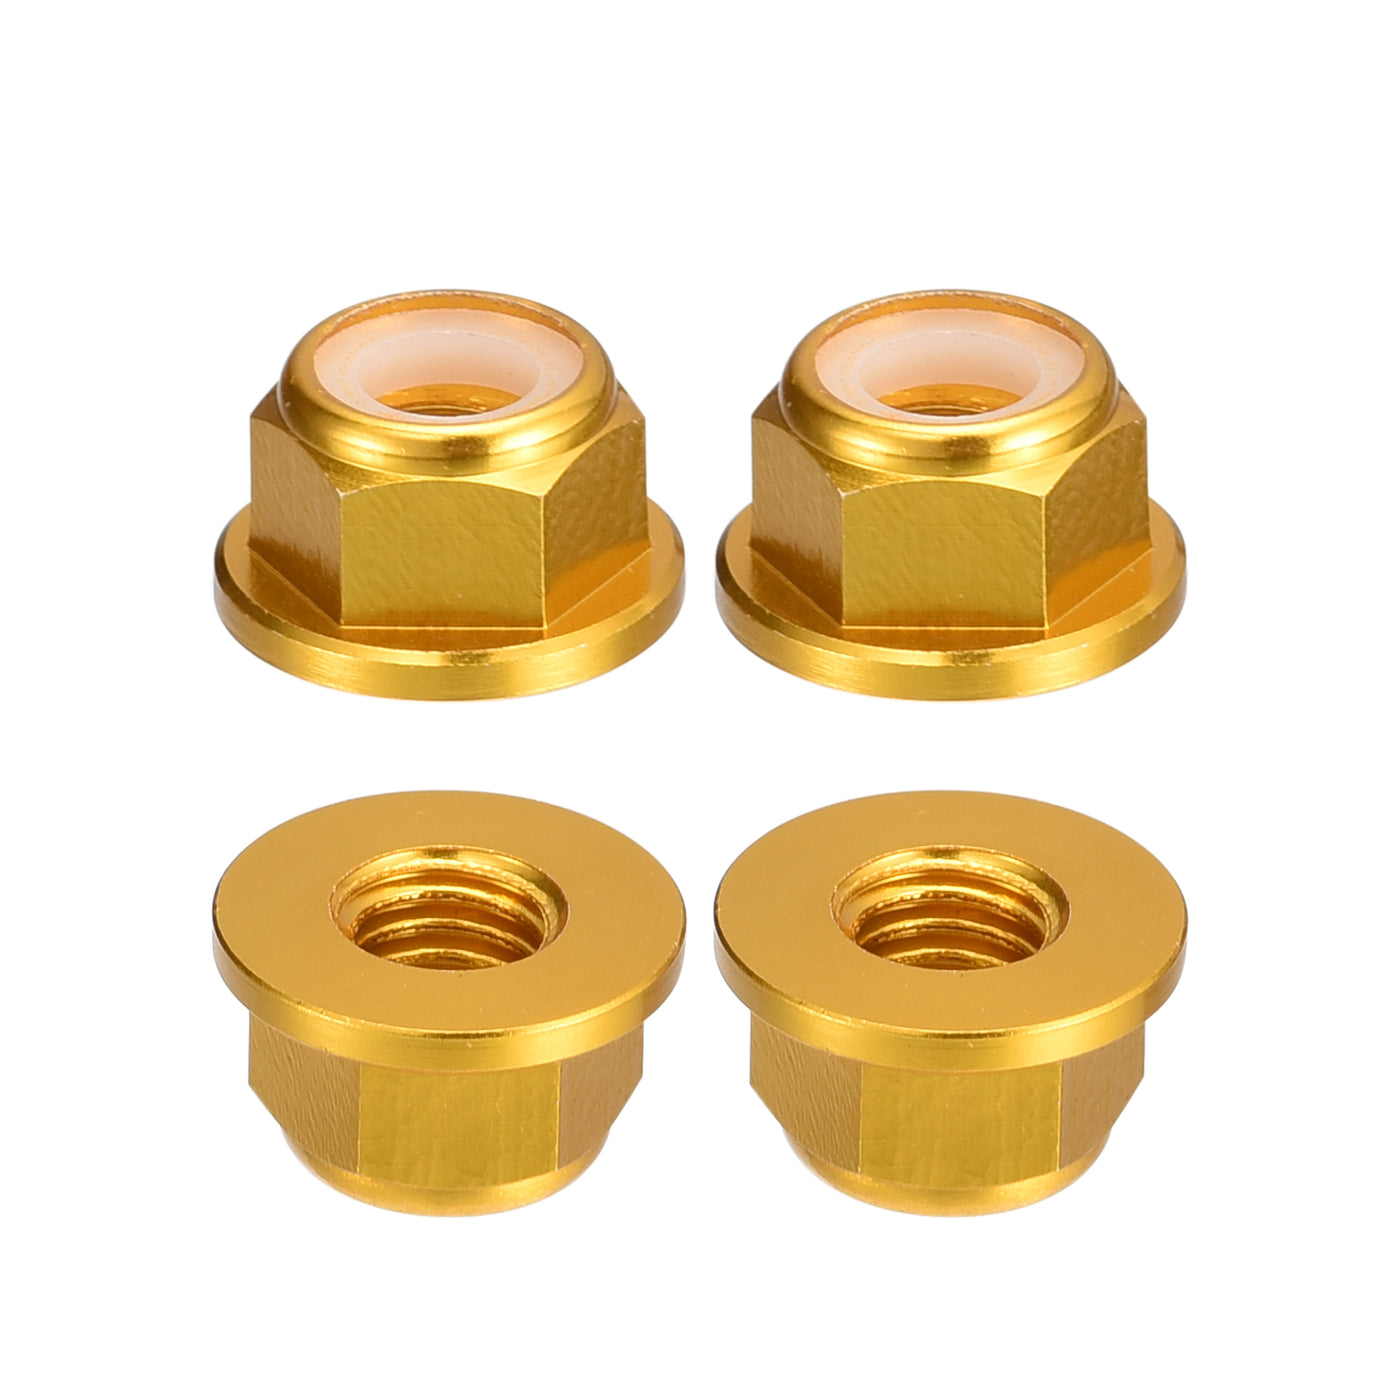 uxcell Uxcell Nylon Insert Hex Lock Nuts, 4pcs - M3 x 0.5mm Aluminum Alloy Self-Locking Nut, Anodizing Flange Lock Nut for Fasteners (Gold)